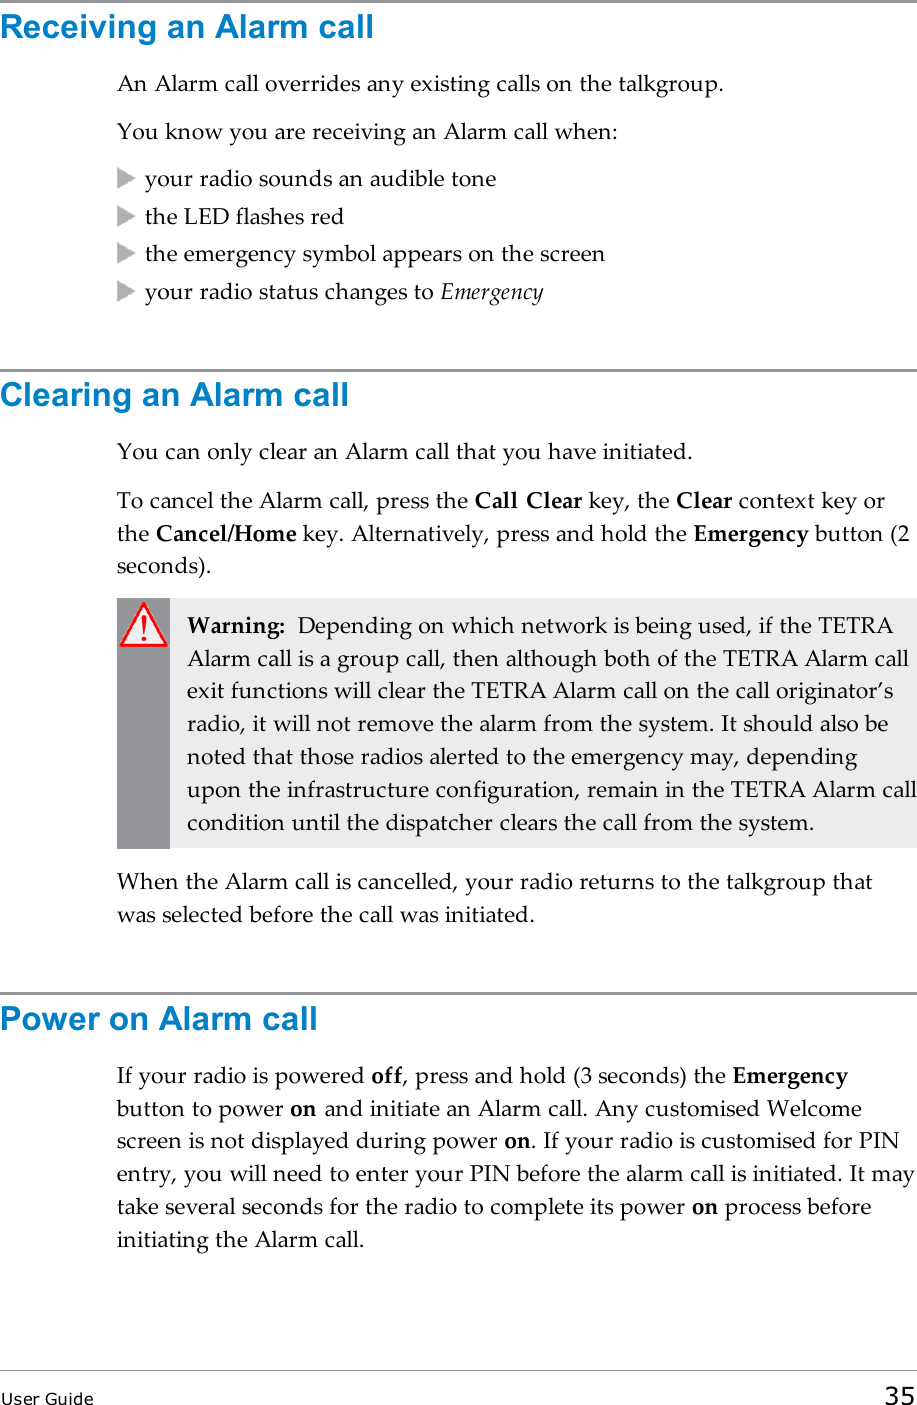 Receiving an Alarm callAn Alarm call overrides any existing calls on the talkgroup.You know you are receiving an Alarm call when:your radio sounds an audible tonethe LED flashes redthe emergency symbol appears on the screenyour radio status changes to EmergencyClearing an Alarm callYou can only clear an Alarm call that you have initiated.To cancel the Alarm call, press the Call Clear key, the Clear context key orthe Cancel/Home key. Alternatively, press and hold the Emergency button (2seconds).Warning: Depending on which network is being used, if the TETRAAlarm call is a group call, then although both of the TETRA Alarm callexit functions will clear the TETRA Alarm call on the call originator’sradio, it will not remove the alarm from the system. It should also benoted that those radios alerted to the emergency may, dependingupon the infrastructure configuration, remain in the TETRA Alarm callcondition until the dispatcher clears the call from the system.When the Alarm call is cancelled, your radio returns to the talkgroup thatwas selected before the call was initiated.Power on Alarm callIf your radio is powered off, press and hold (3 seconds) the Emergencybutton to power on and initiate an Alarm call. Any customised Welcomescreen is not displayed during power on. If your radio is customised for PINentry, you will need to enter your PIN before the alarm call is initiated. It maytake several seconds for the radio to complete its power on process beforeinitiating the Alarm call.User Guide 35